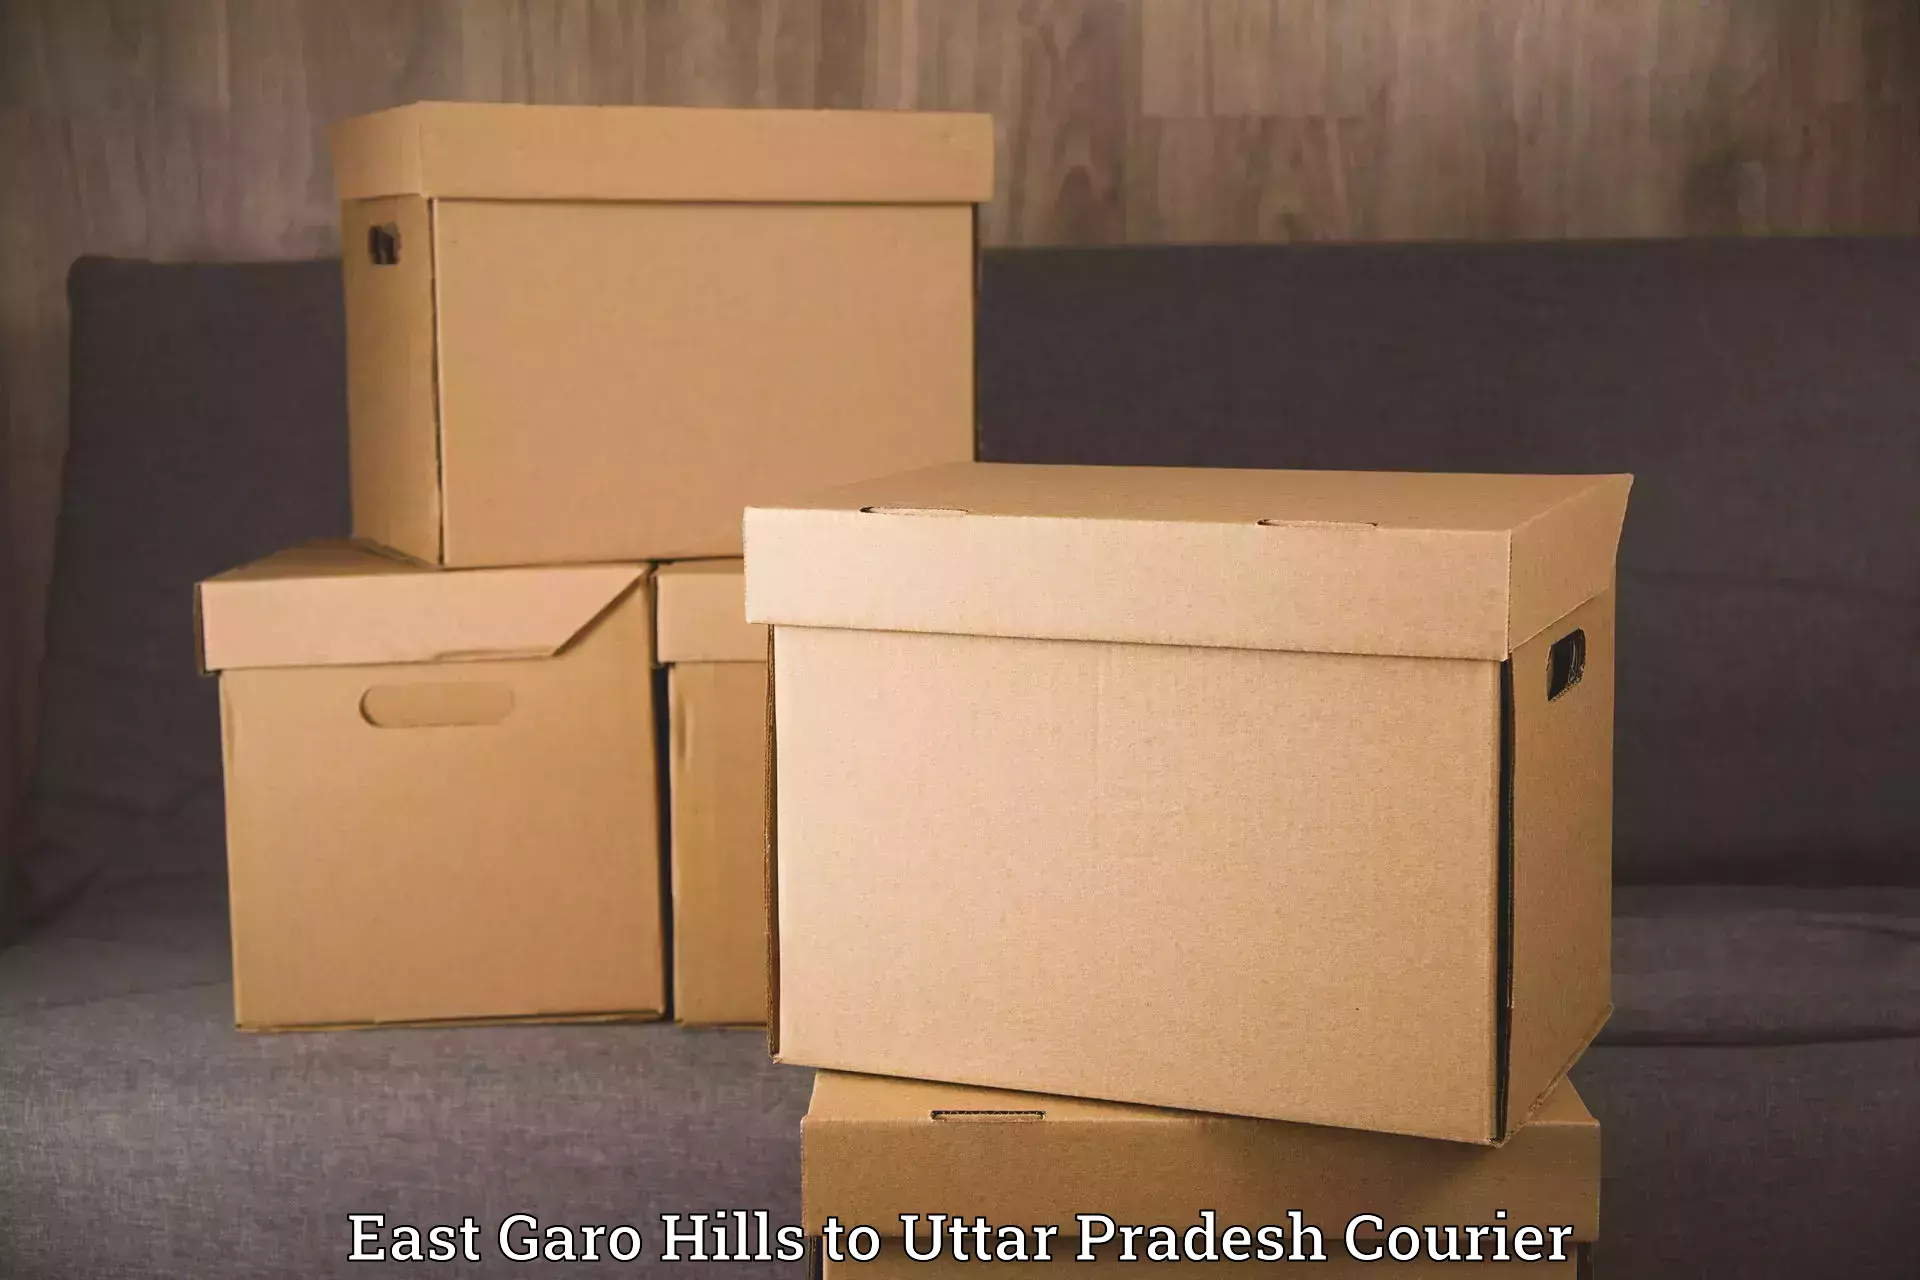 Furniture delivery service East Garo Hills to Chunar